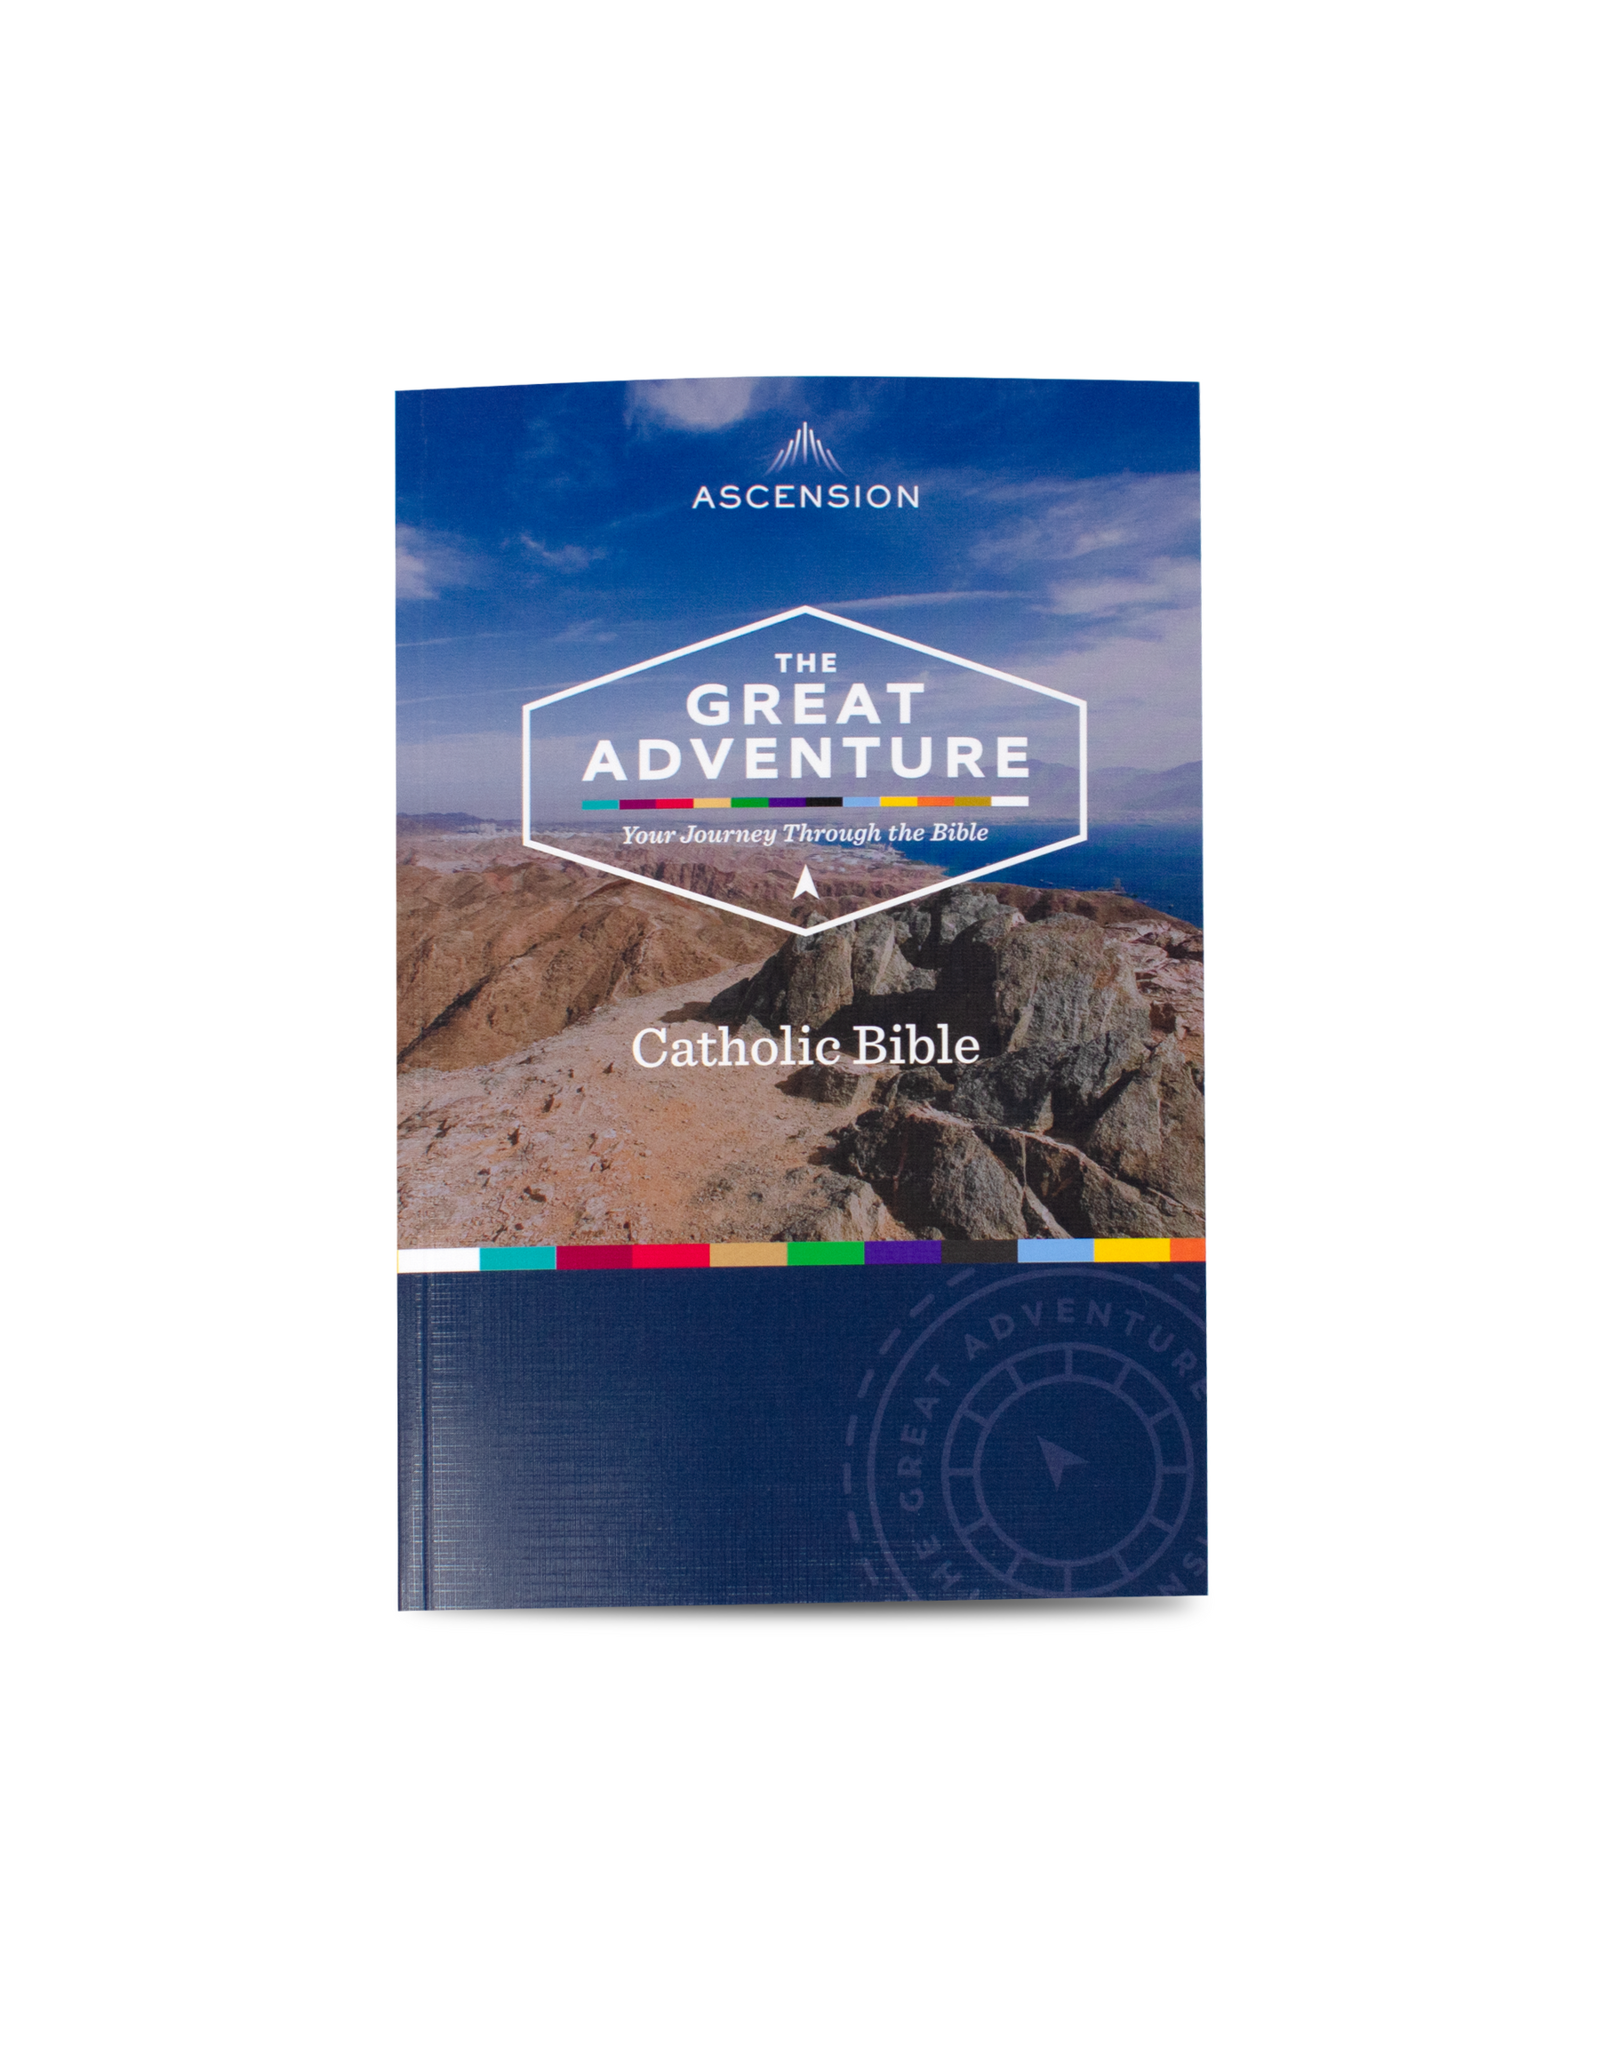 Ascension The Great Adventure Catholic Bible, Second Catholic Edition (RSV, Blue Leathersoft Binding with )